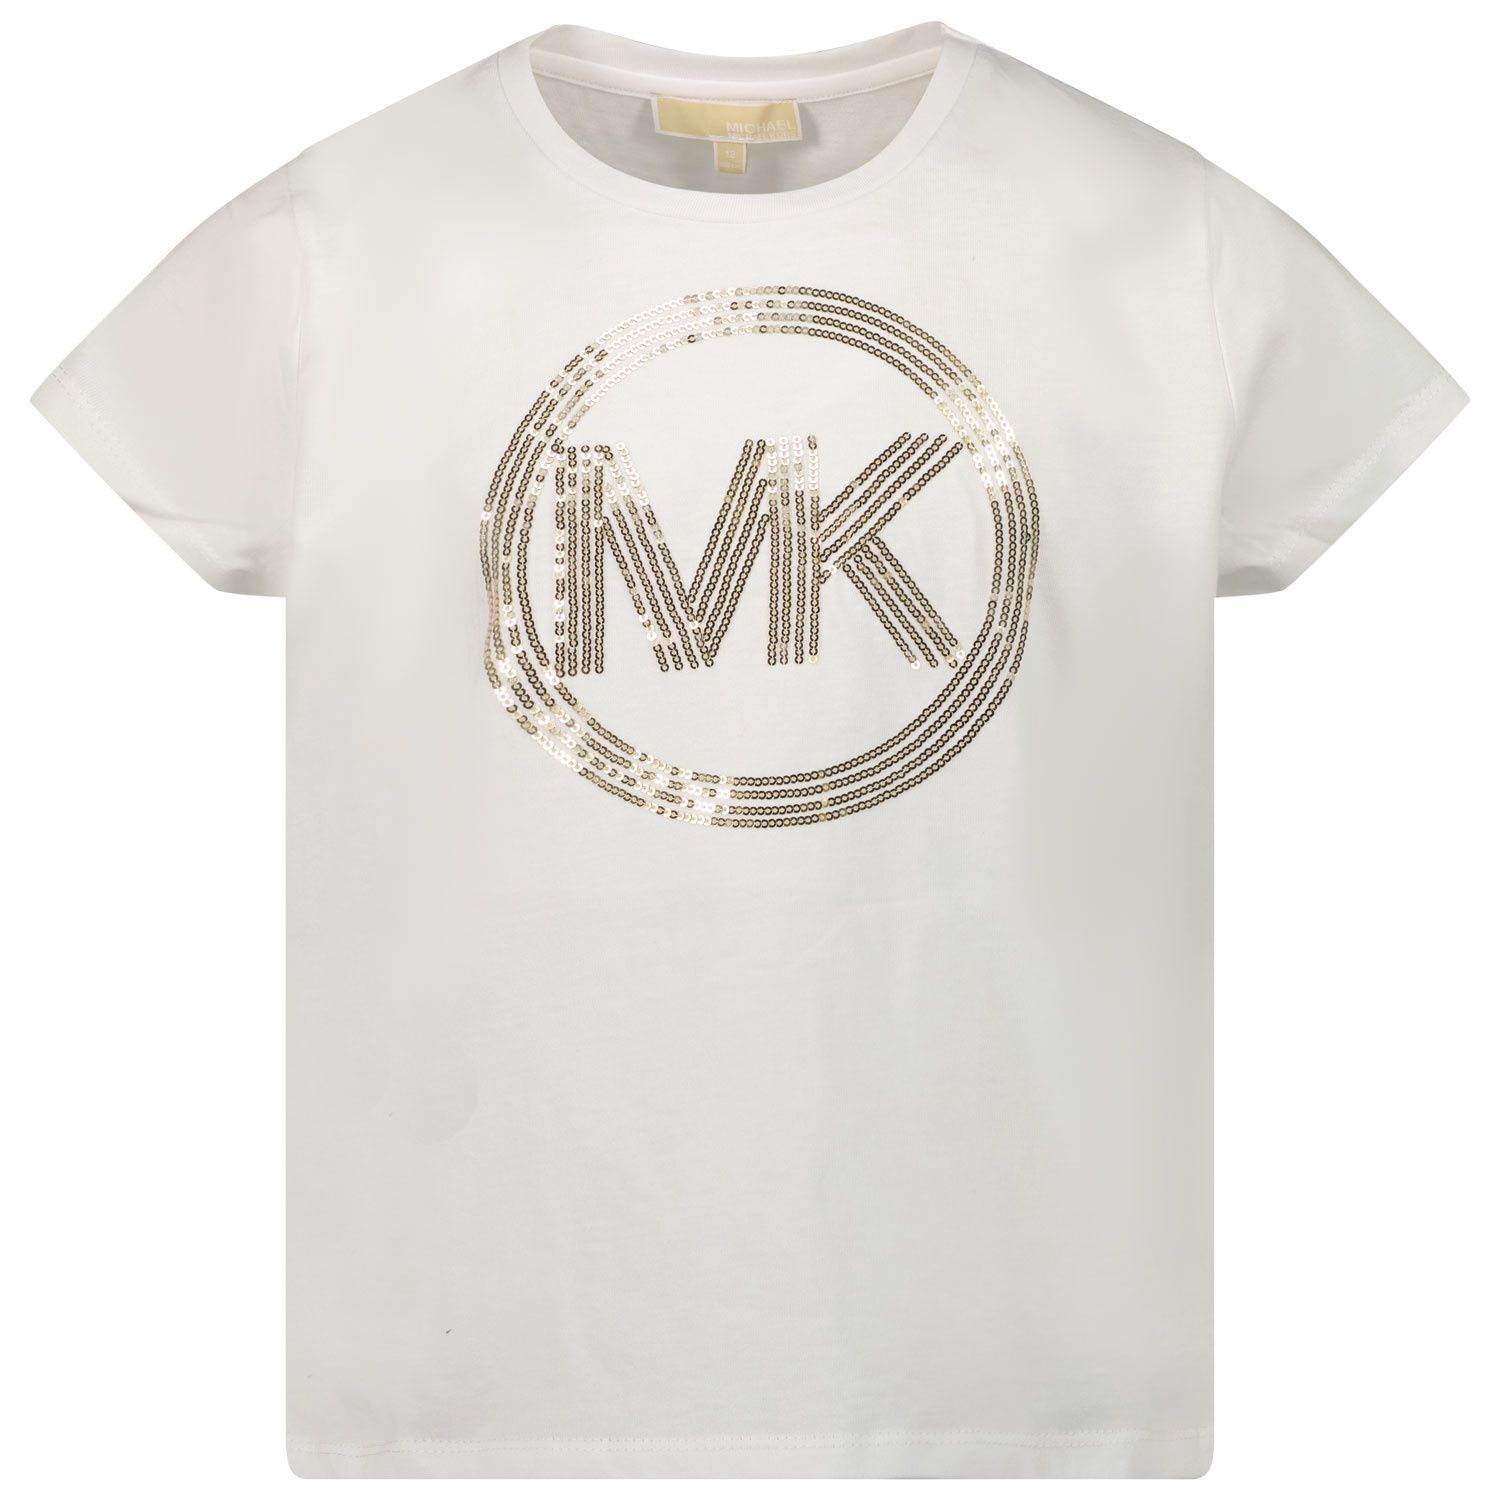 Picture of Michael Kors R15113 kids t-shirt white